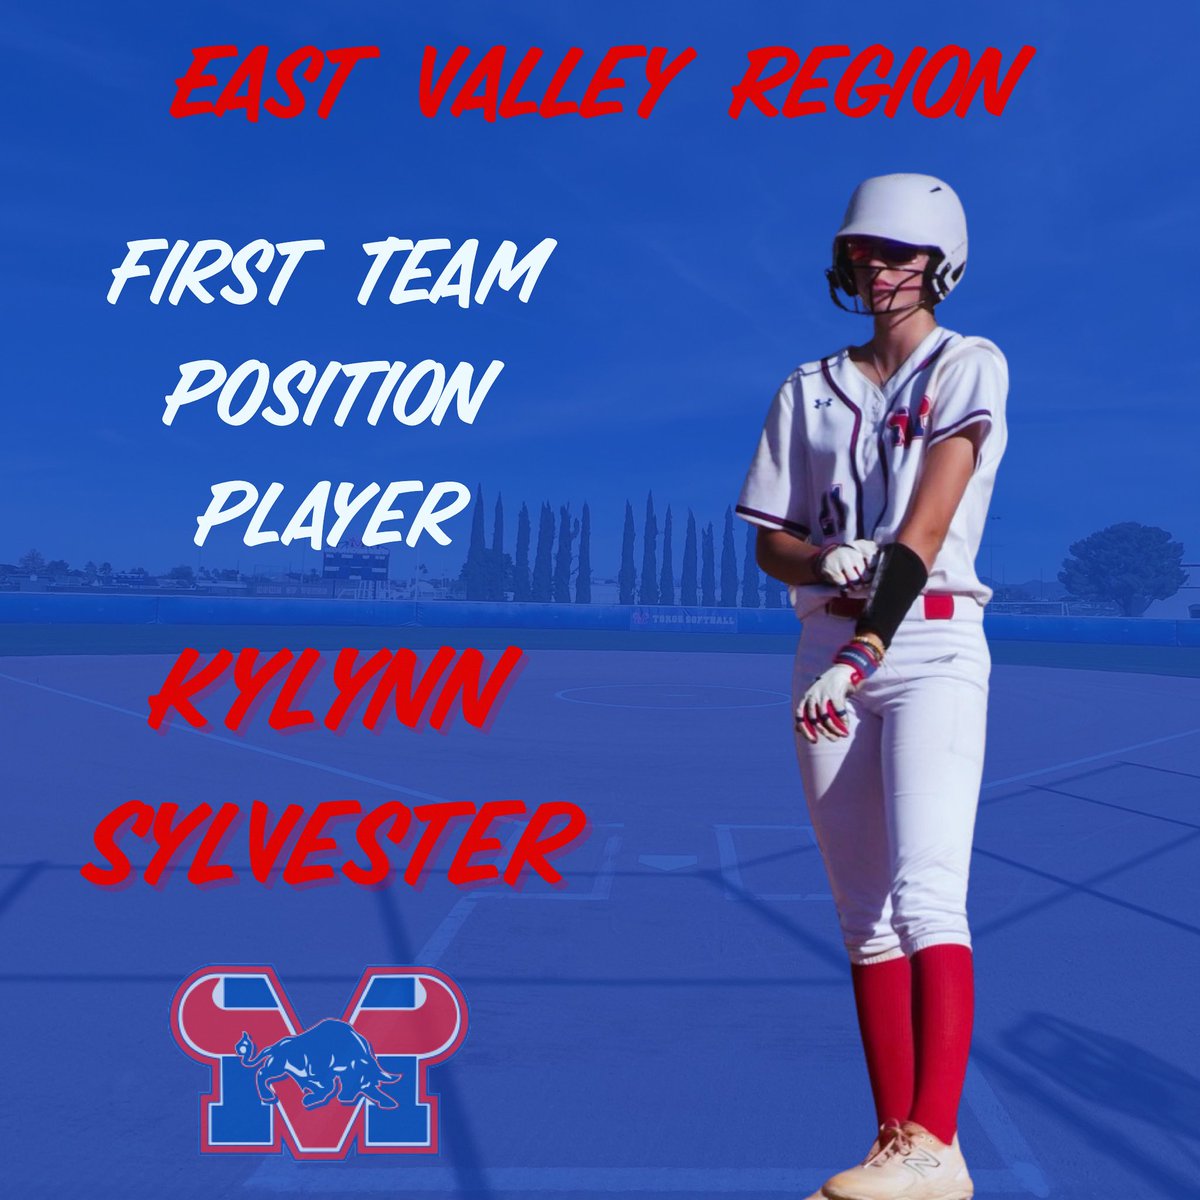 Sophomore Kylynn Sylvester is awarded First Team Position Player for East Valley Region. Congratulations on a great season Kylynn!